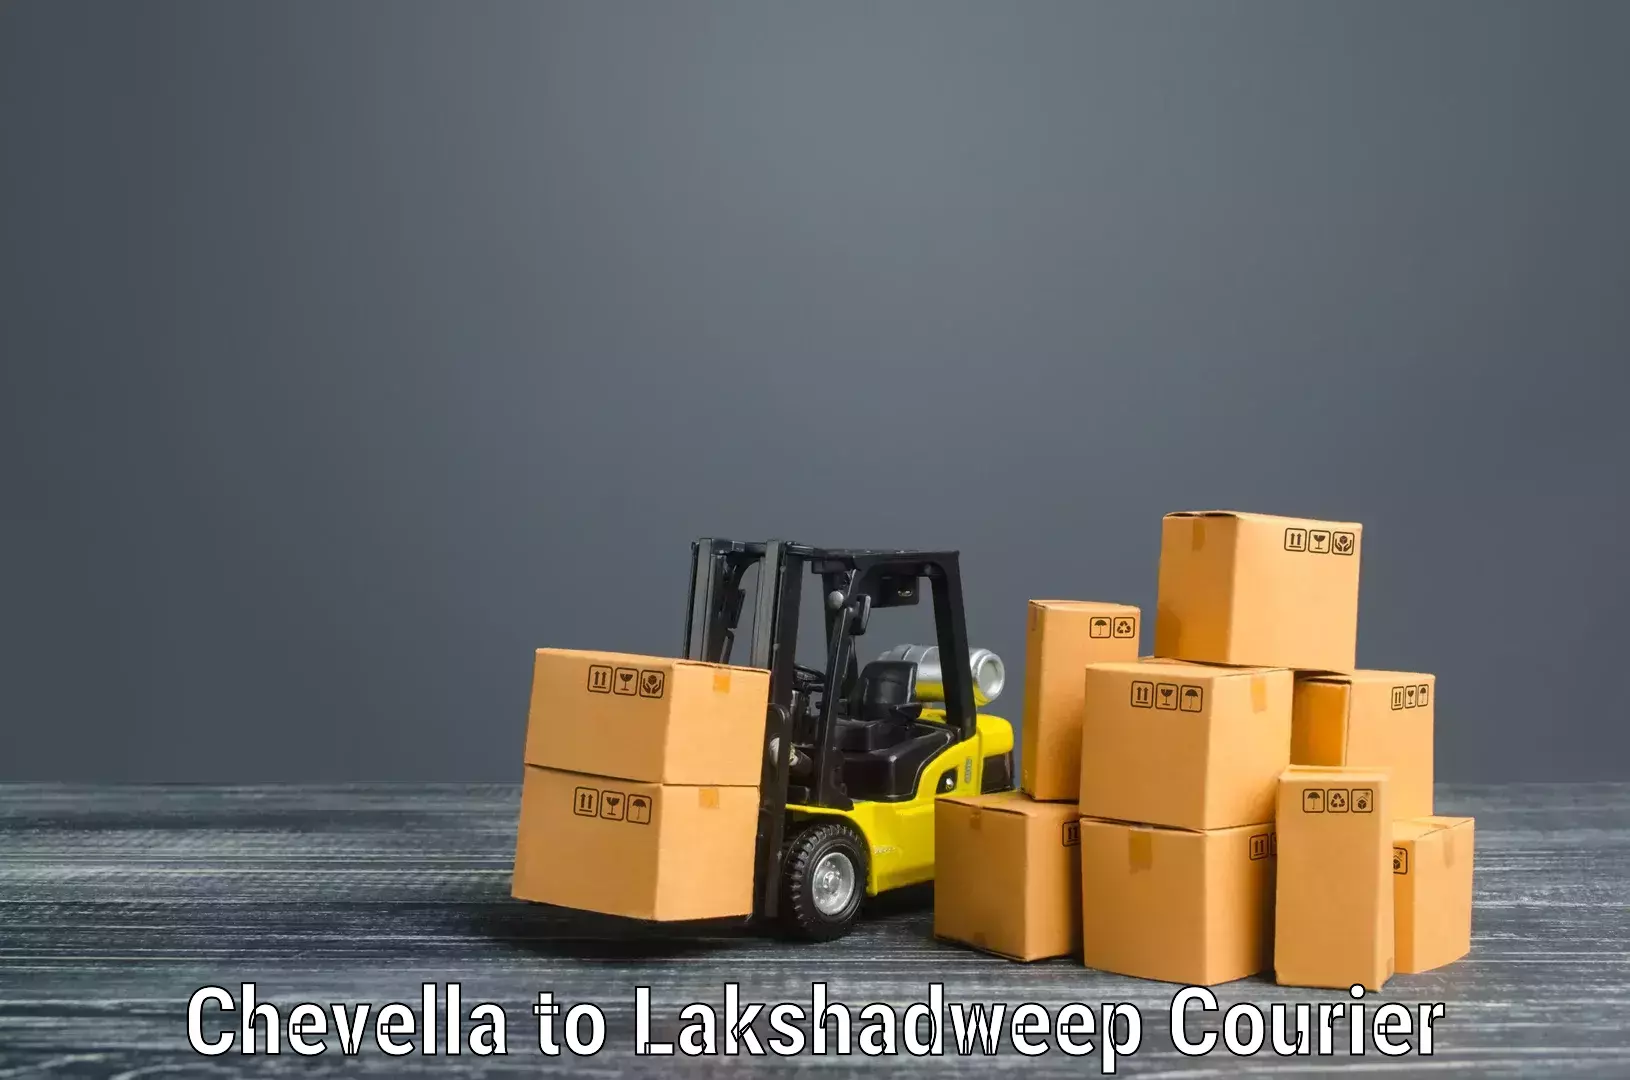 Furniture transport services in Chevella to Lakshadweep